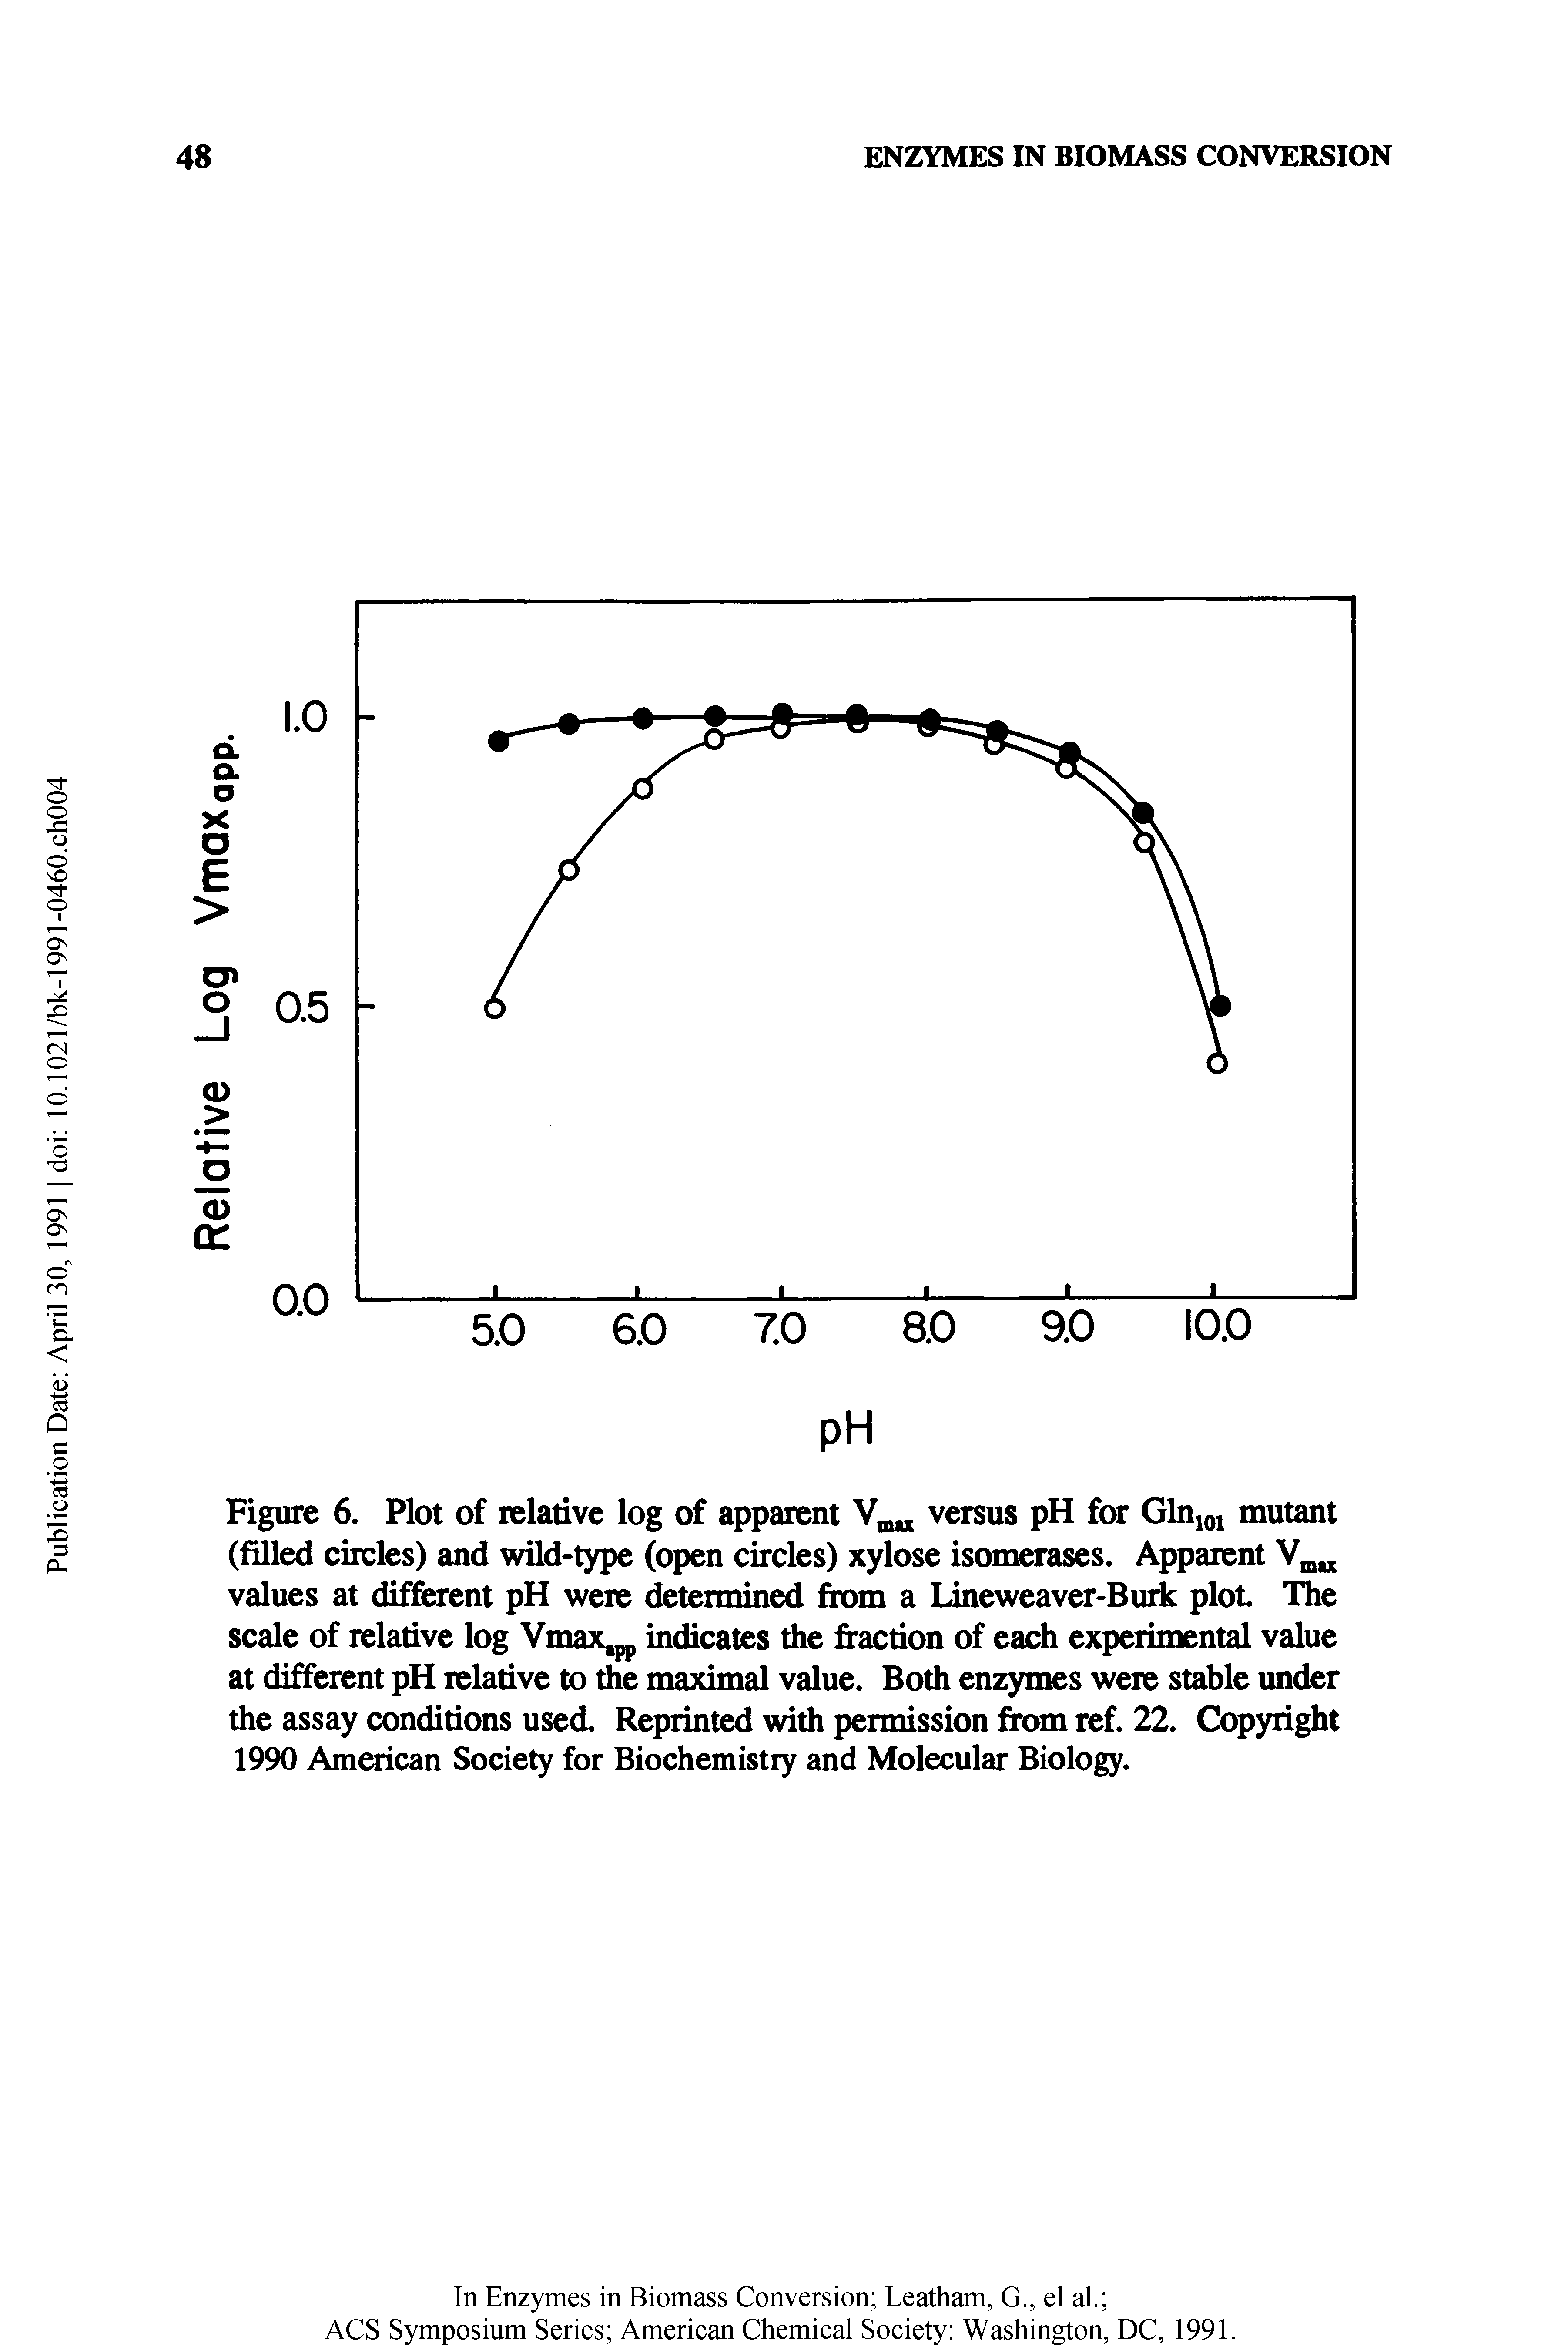 Figure 6. Plot of relative log of apparent versus pH for Ghiioi mutant (filled circles) and wild-type (open circles) xylose isomerases. Apparent values at different pH were determined from a Lineweaver-Burk plot. The scale of relative log Vmax pp indicates the fraction of each experimental value at different pH relative to the maximal value. Both enzymes were stable under the assay conditions used. Reprinted with permission from ref. 22. Copyright 1990 American Society for Biochemistry and Molecular Biology.